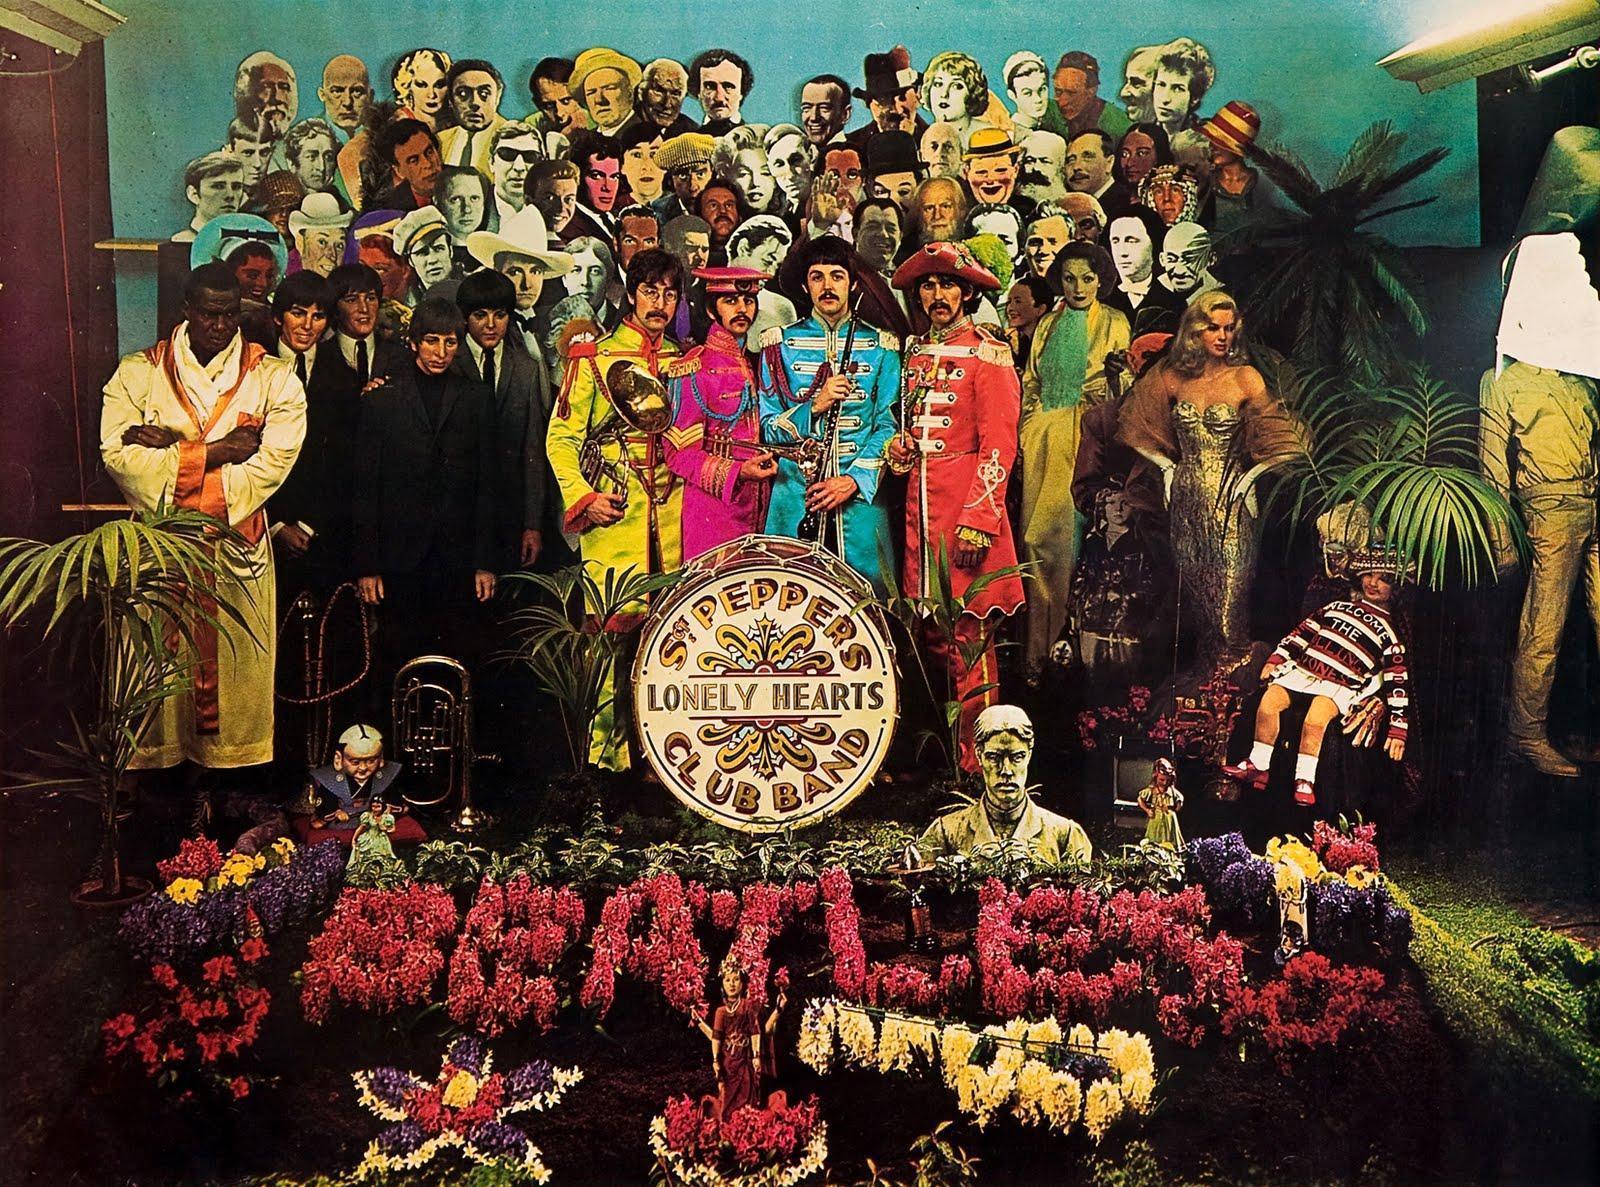 Sgt. Pepper uncropped